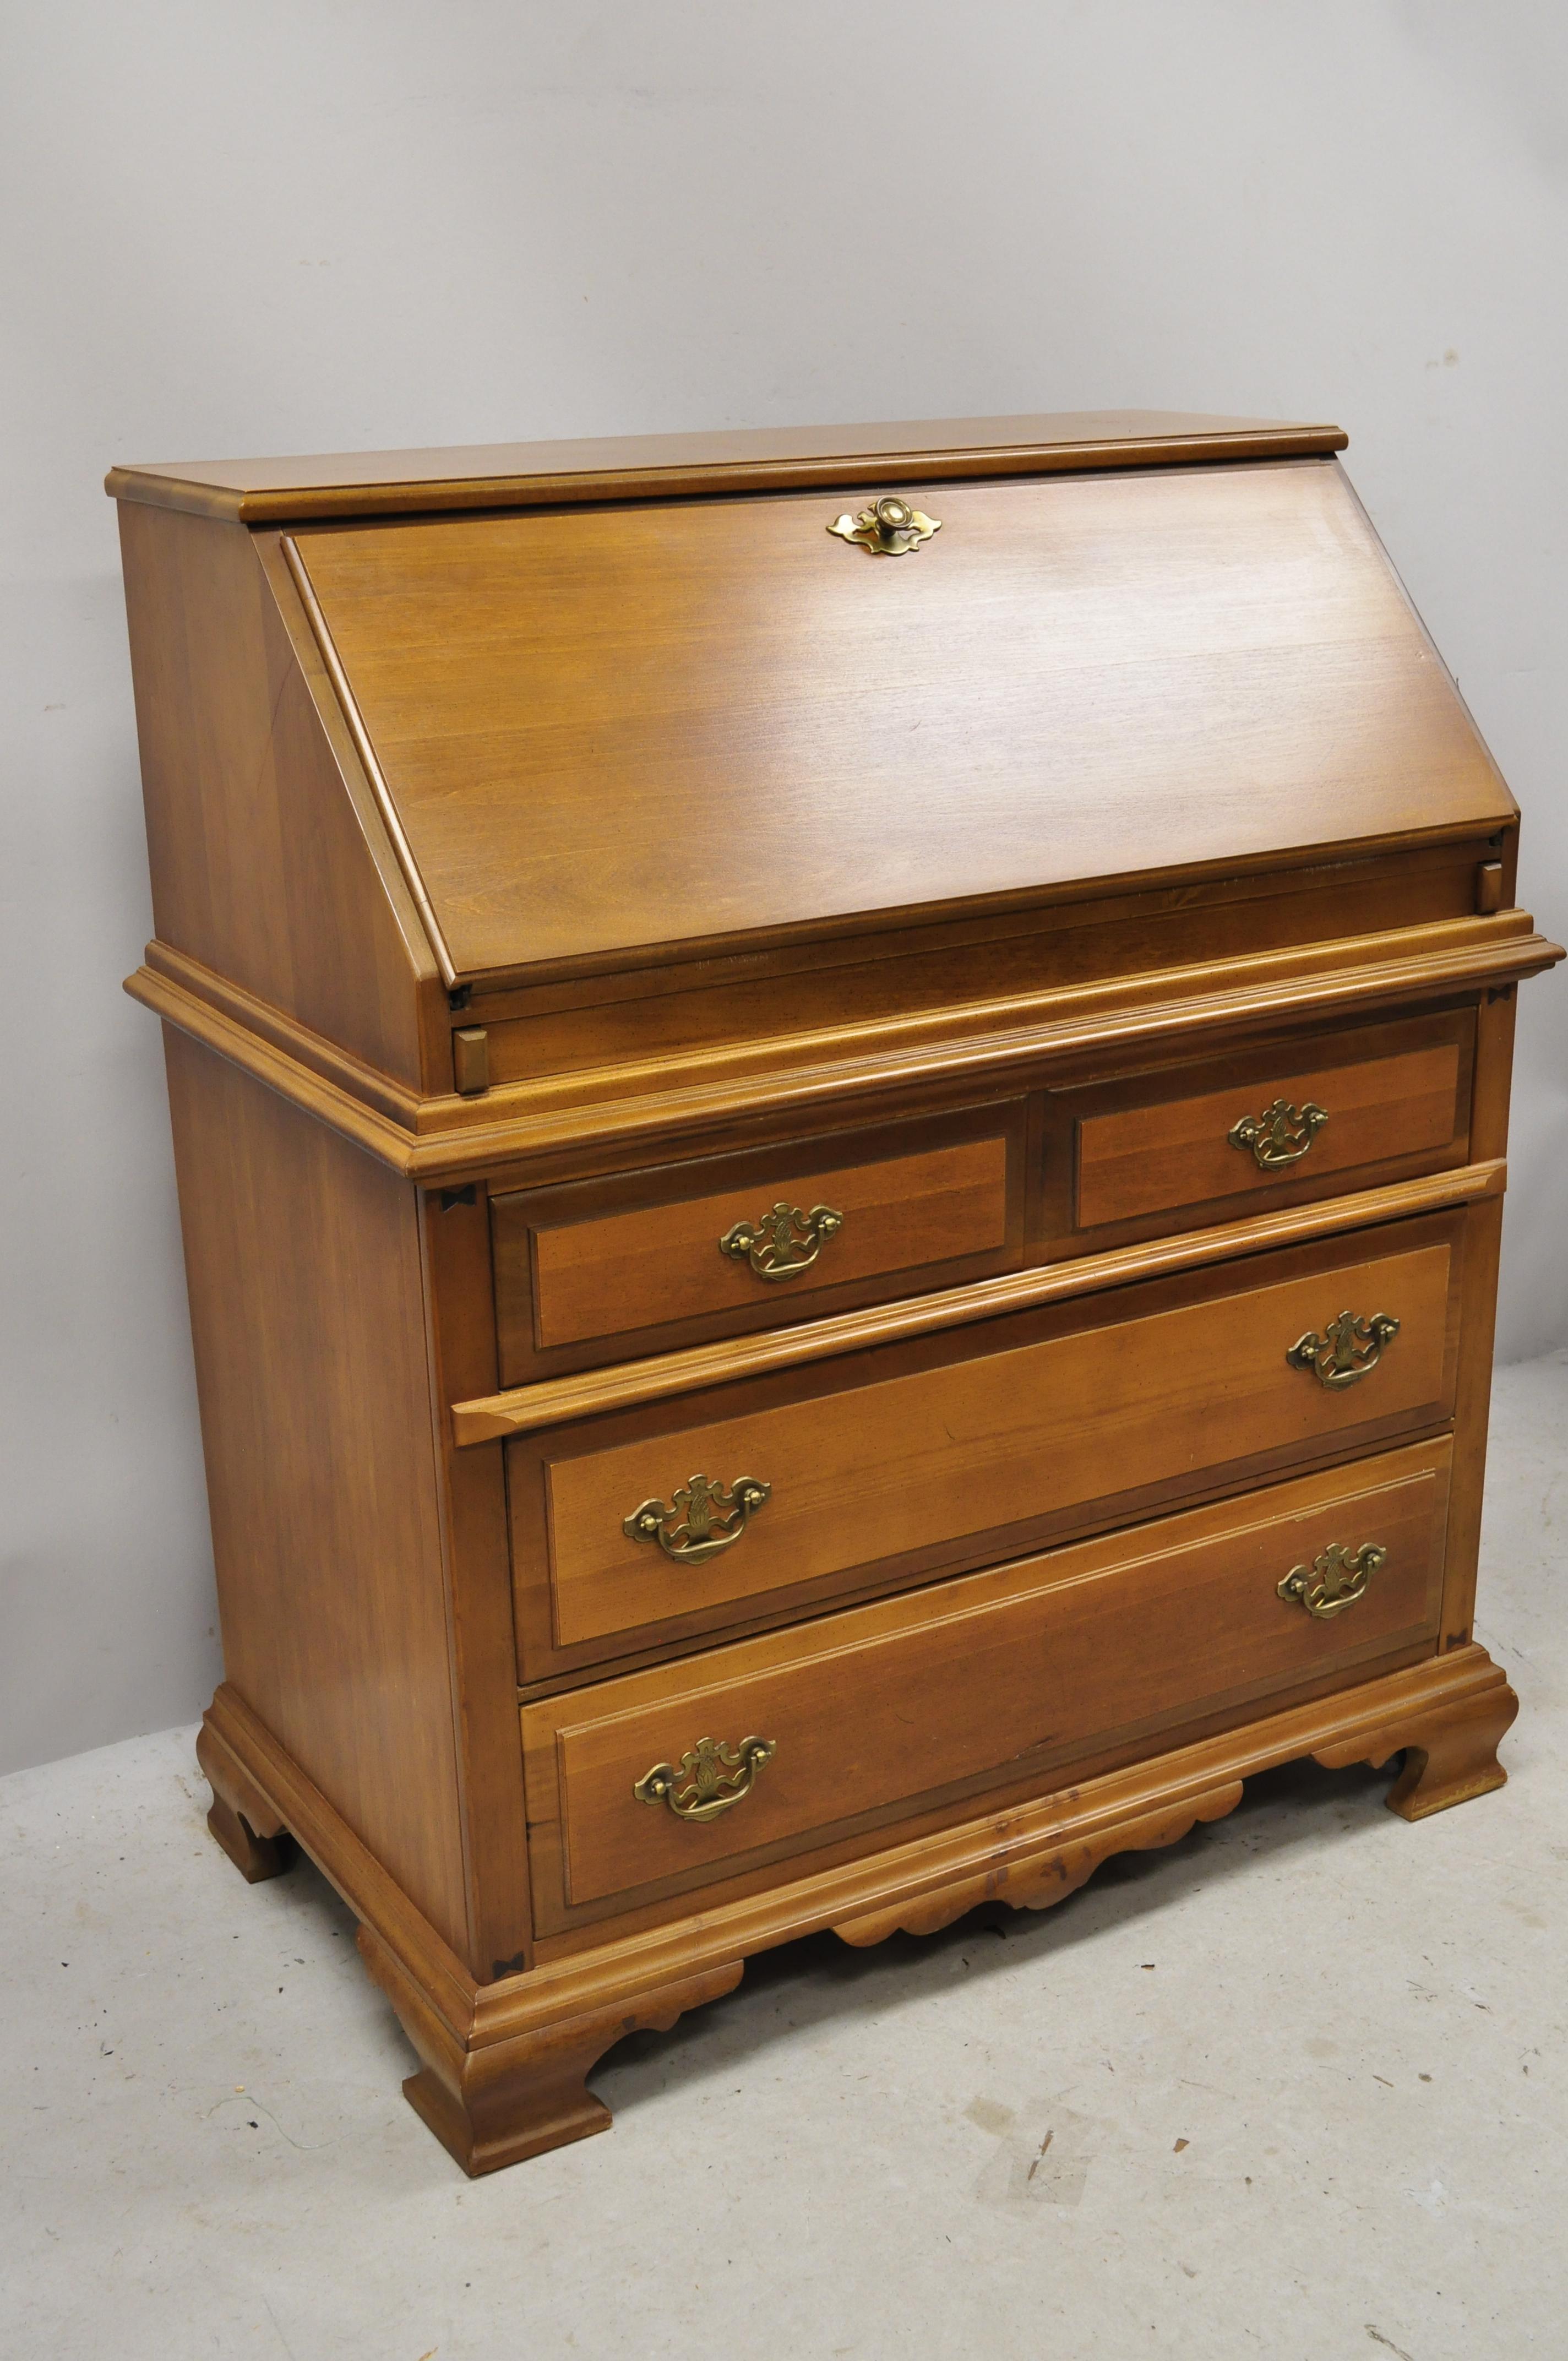 Vintage Bassett furniture maple wood colonial style fall front secretary desk. Item features a fitted interior, beautiful wood grain, original label, 3 dovetailed drawers, solid brass hardware, quality American craftsmanship, circa mid-20th